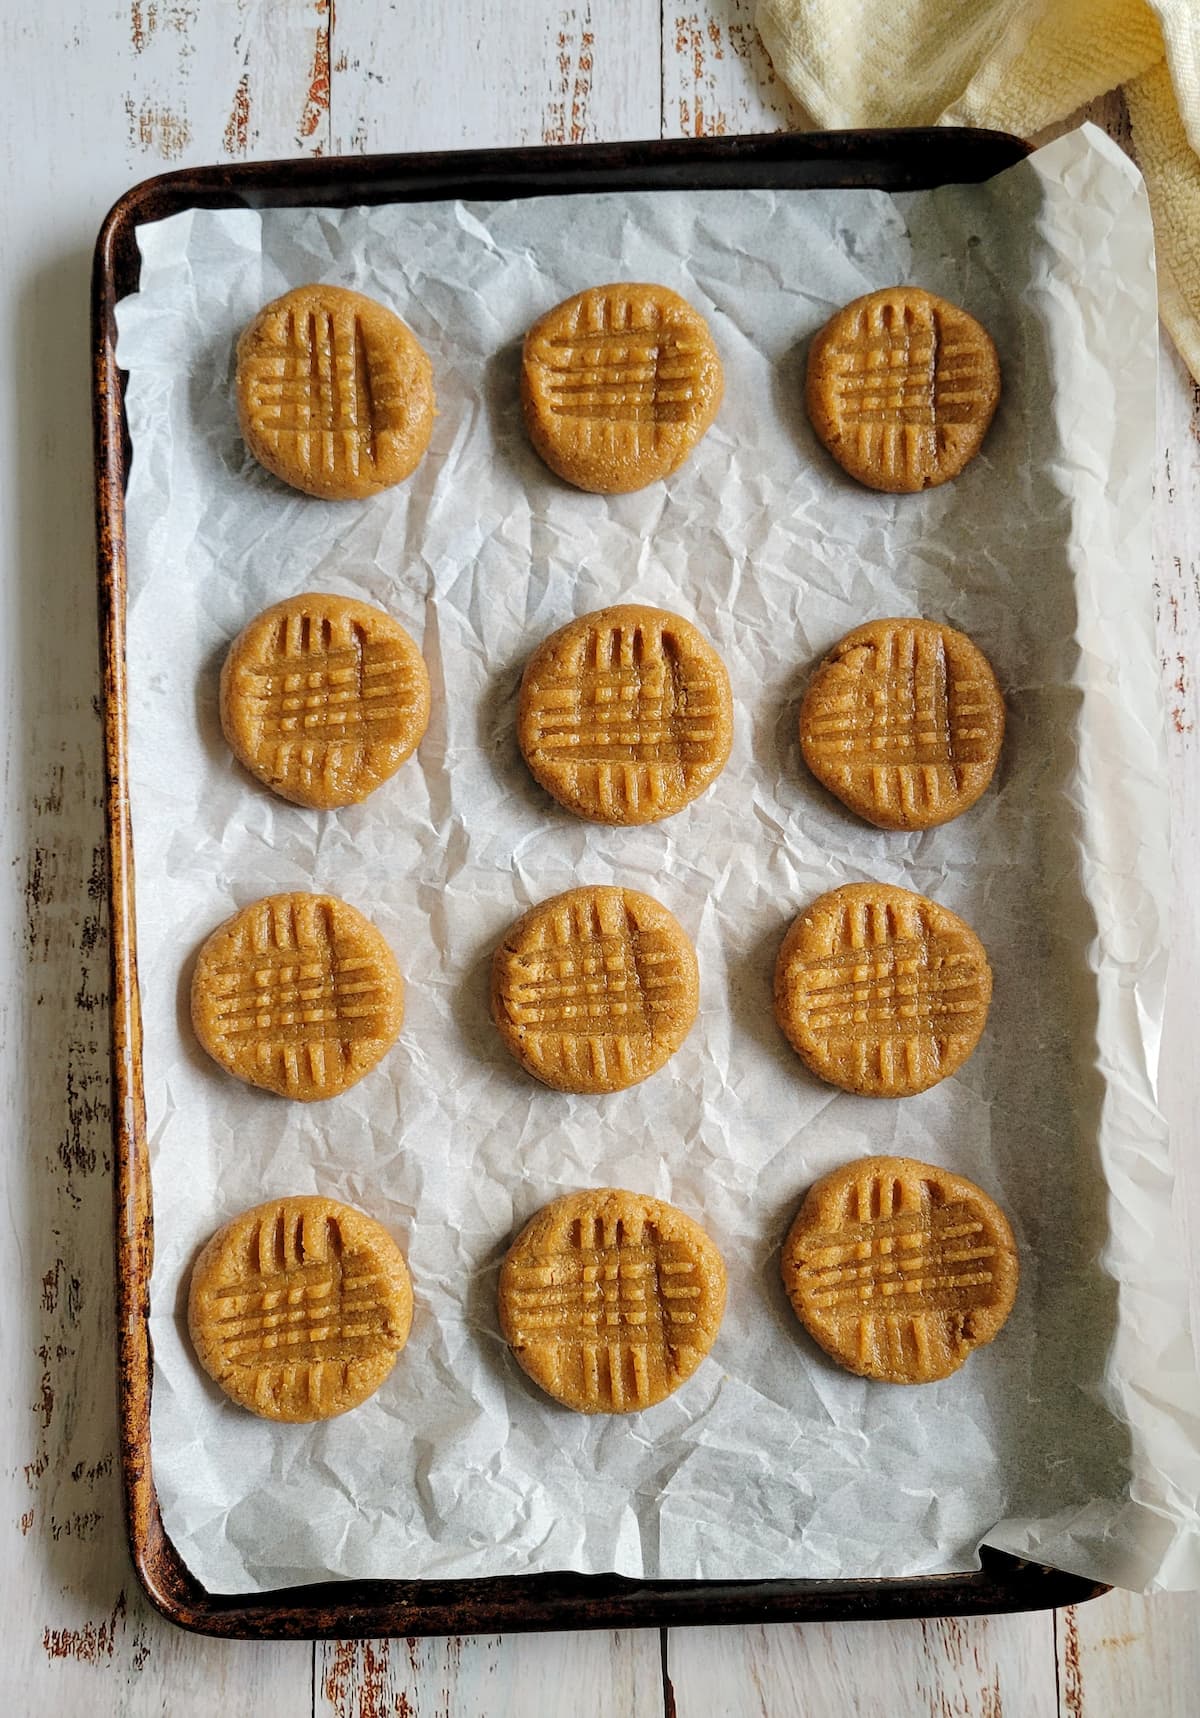 unbaked peanut butter cookies with a criss cross pattern on a parchment lined baking sheet